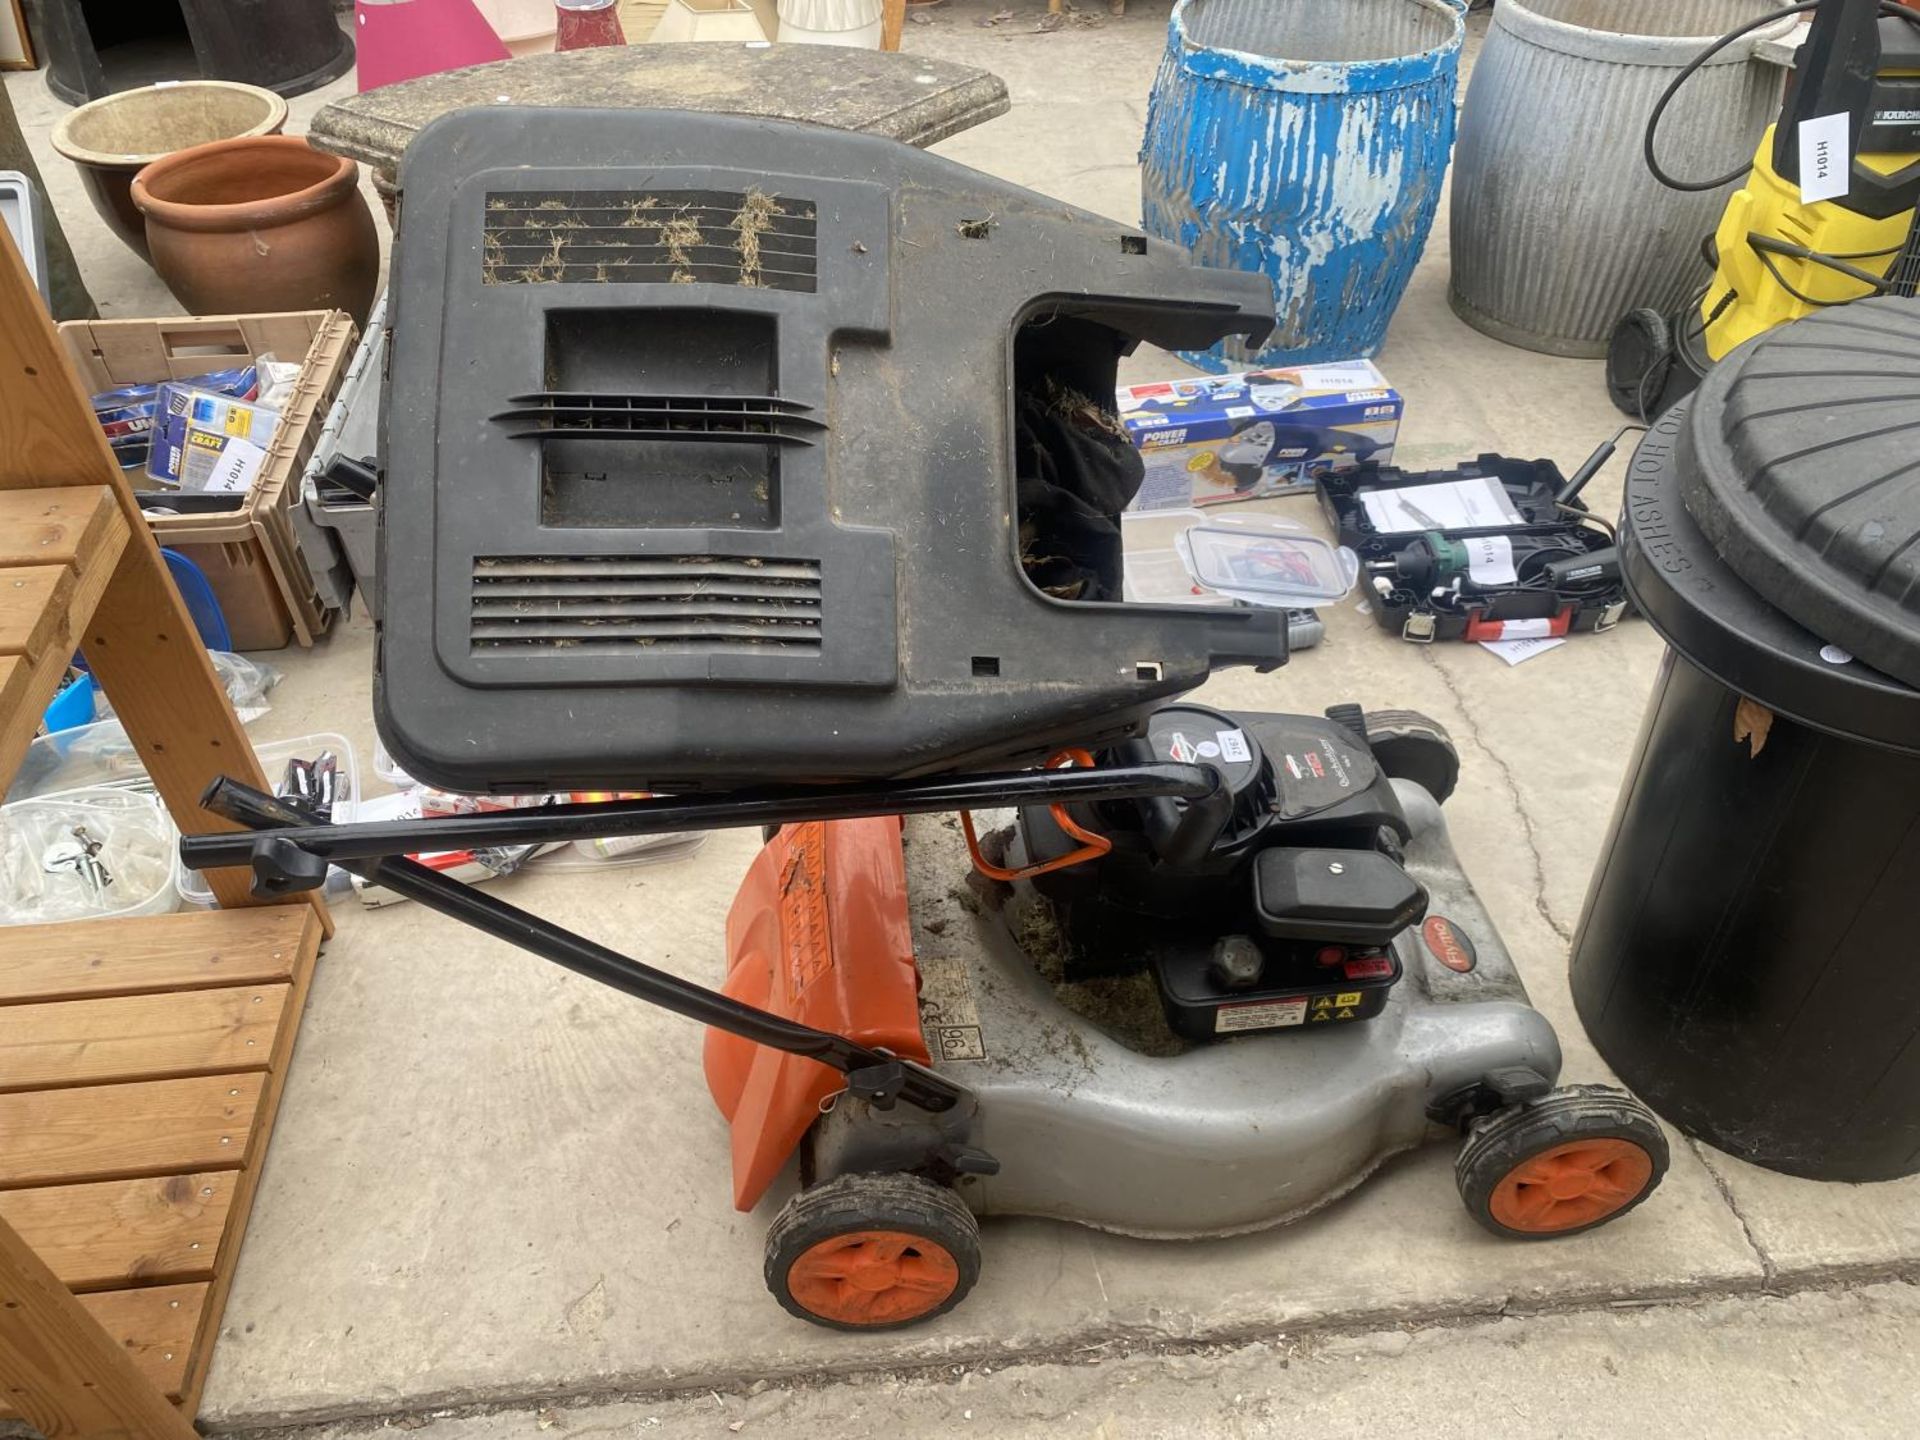 A FLYMO PETROL LAWN MOWER WITH GRASS BOX